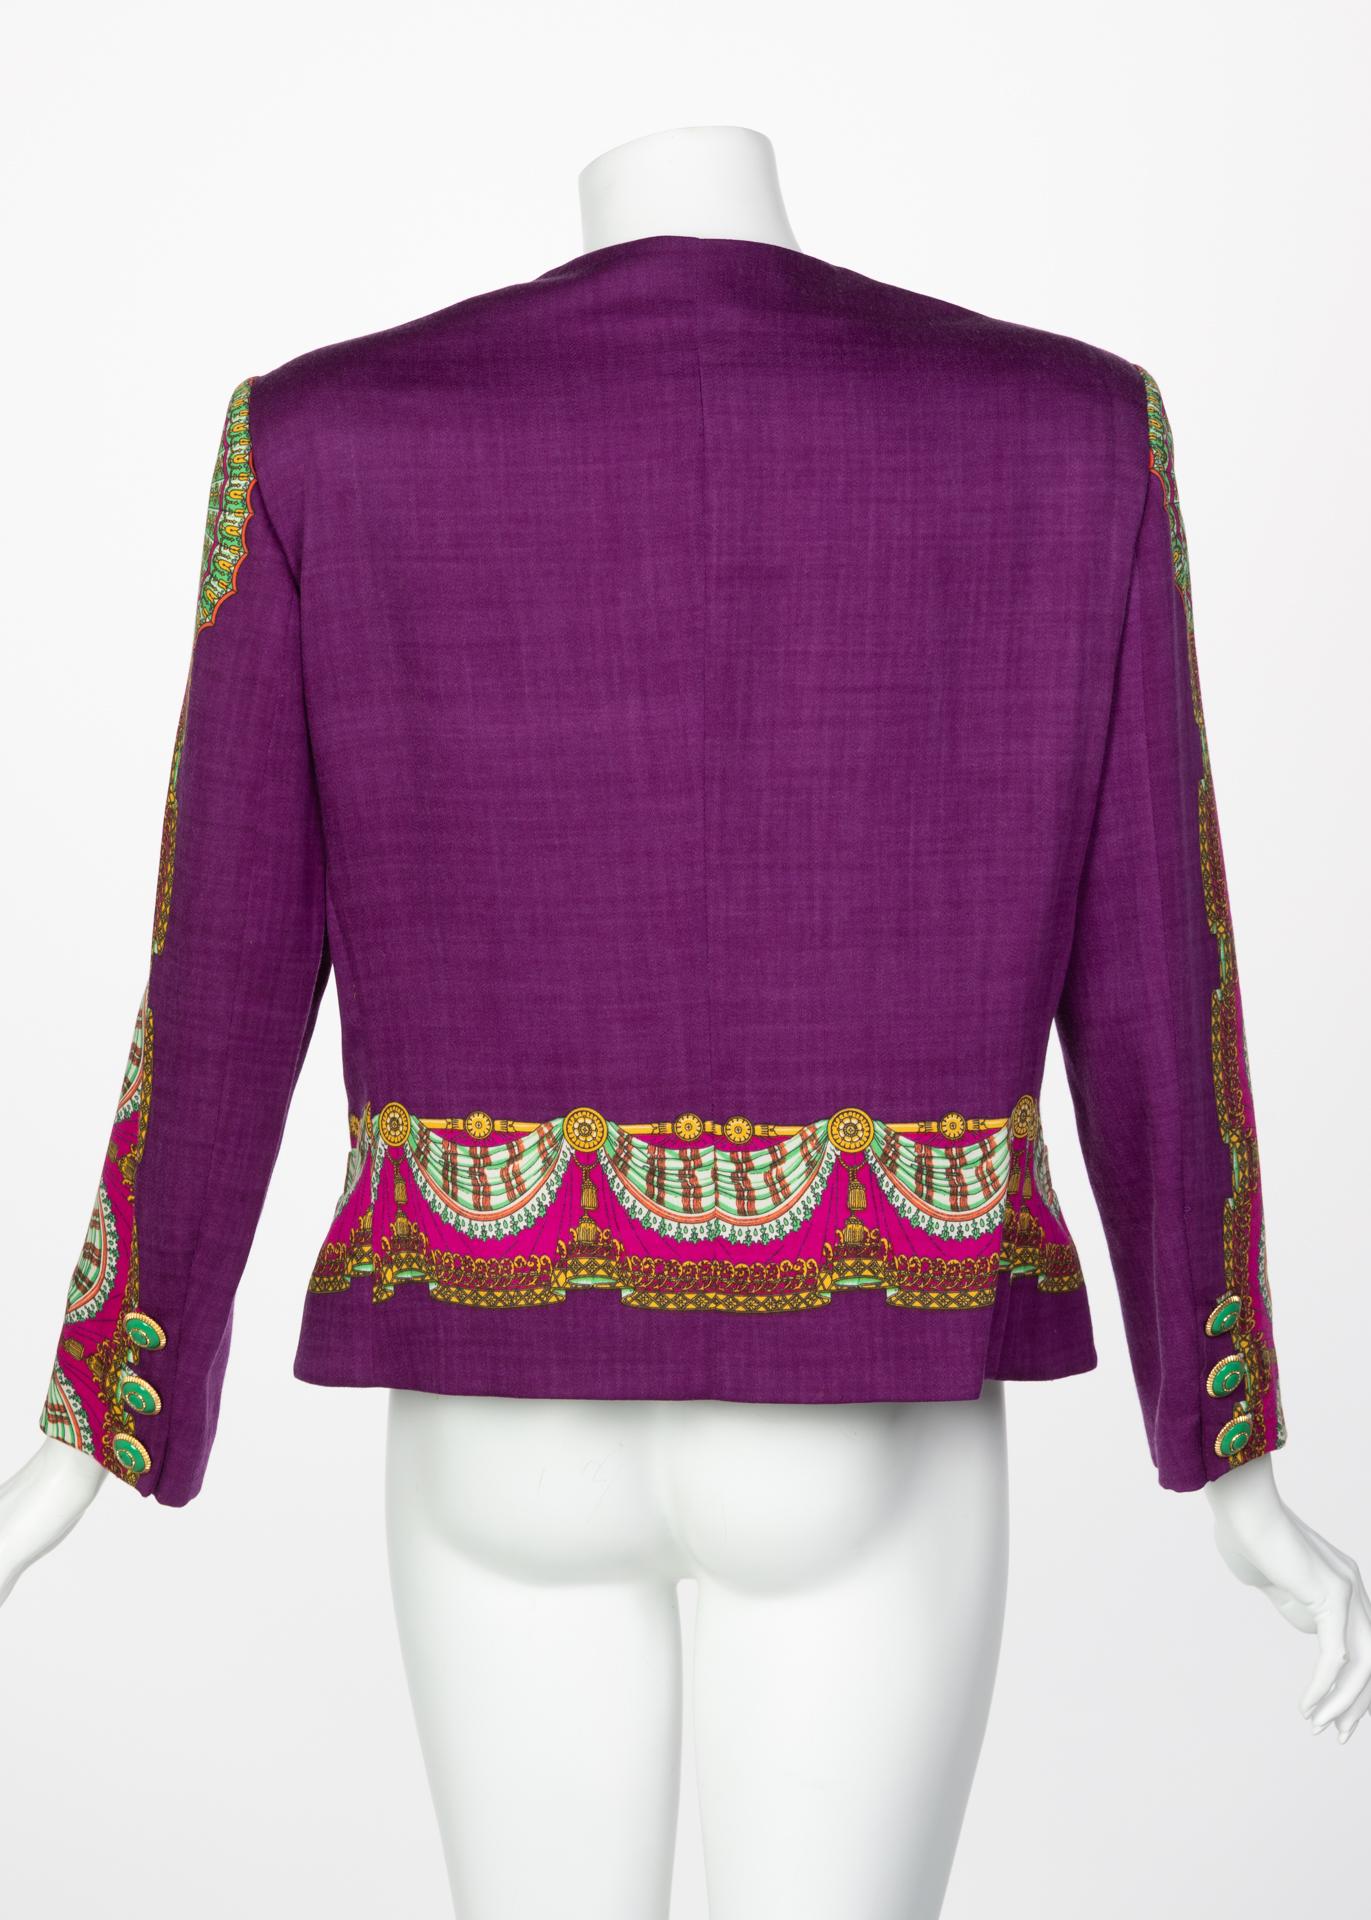 Gianni Versace Couture Purple Green Print Jacket, 1990s For Sale 4